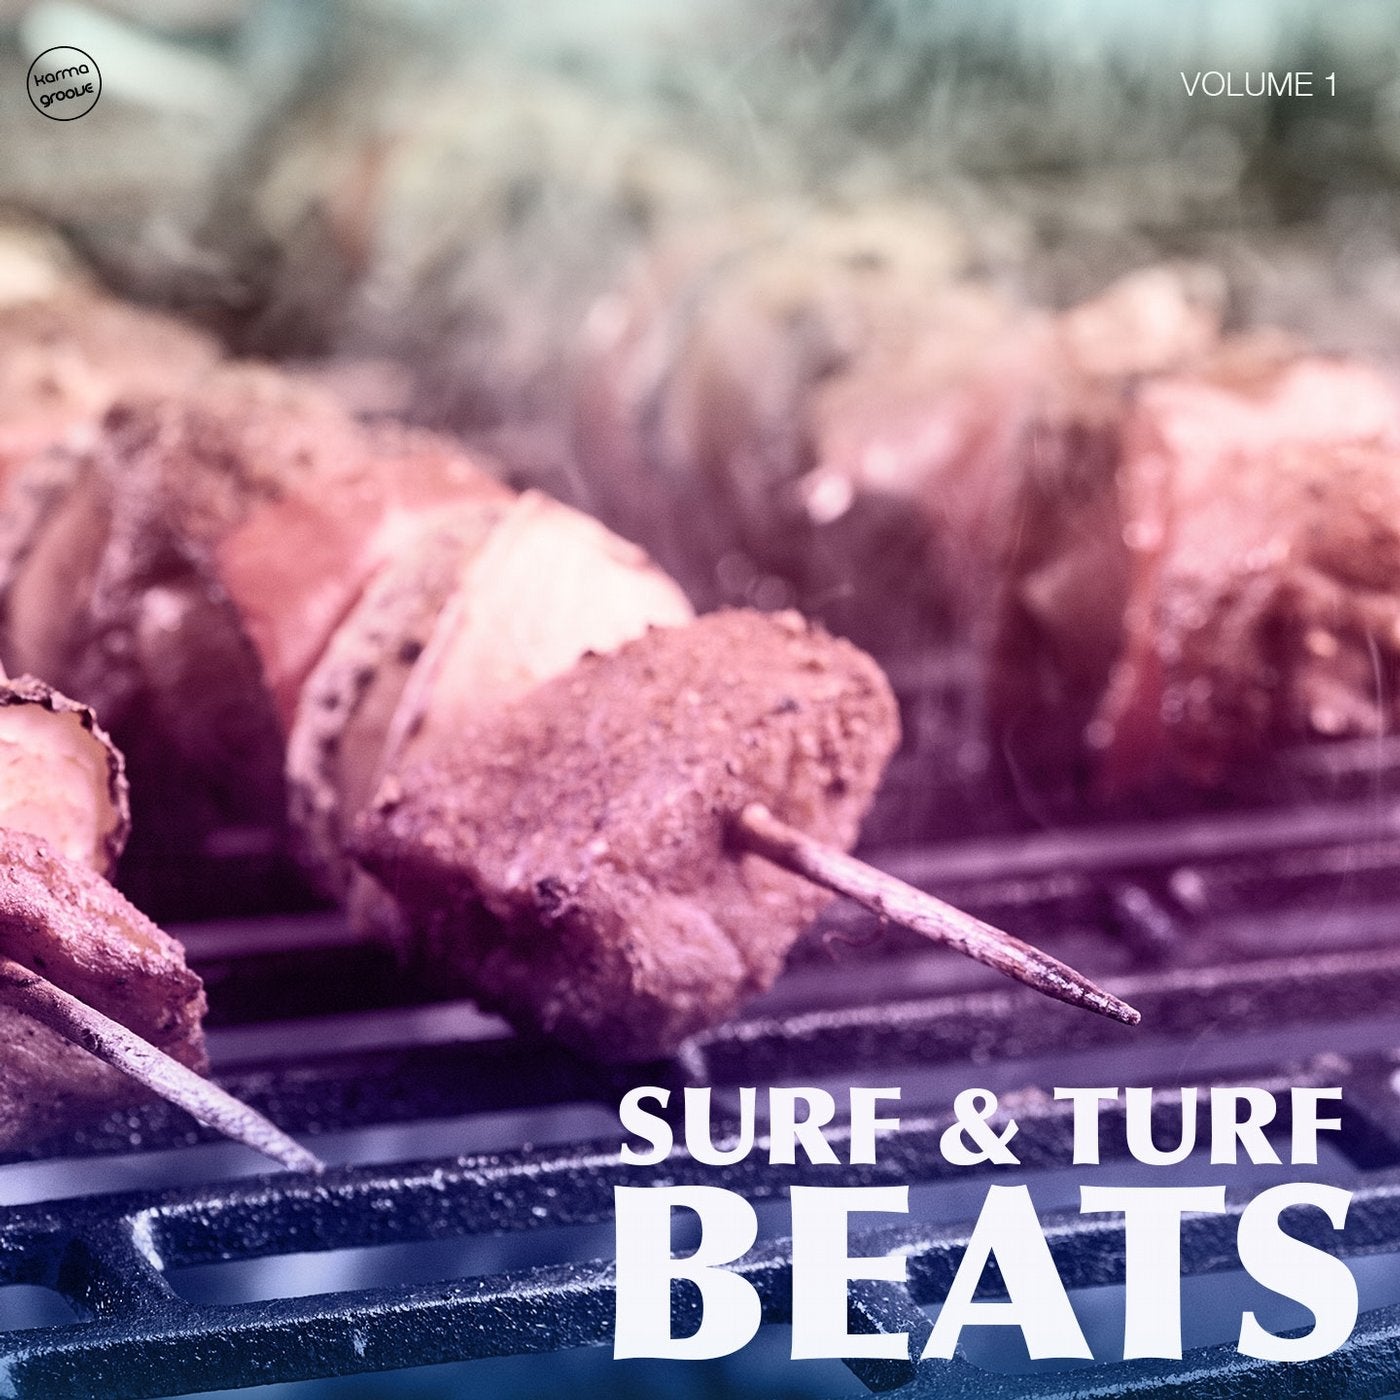 Surf & Turf Beats, Vol. 1 (Selection of Downbeat & Chilled House)